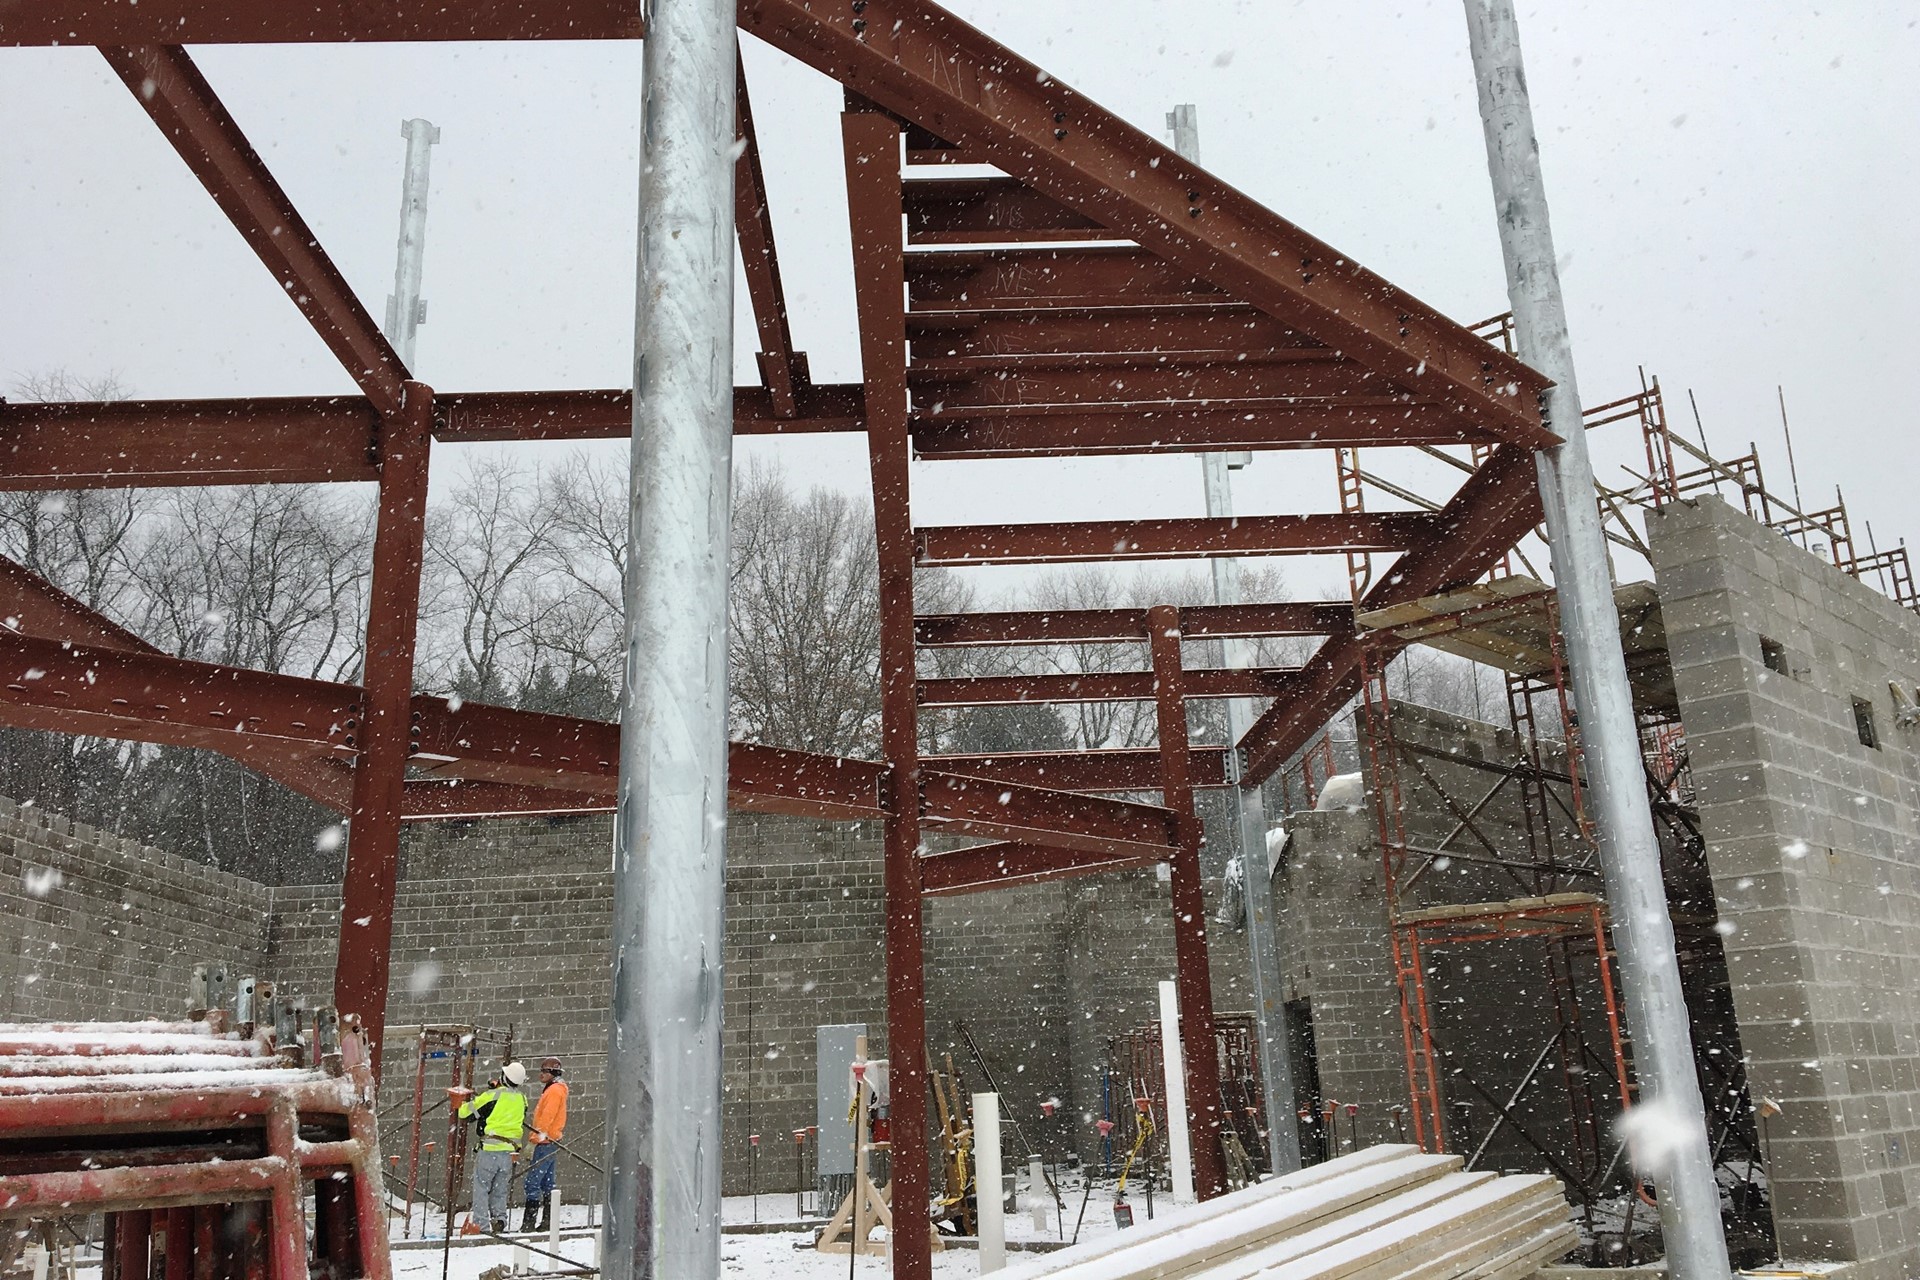 New school construction site: Steel beams erected in place